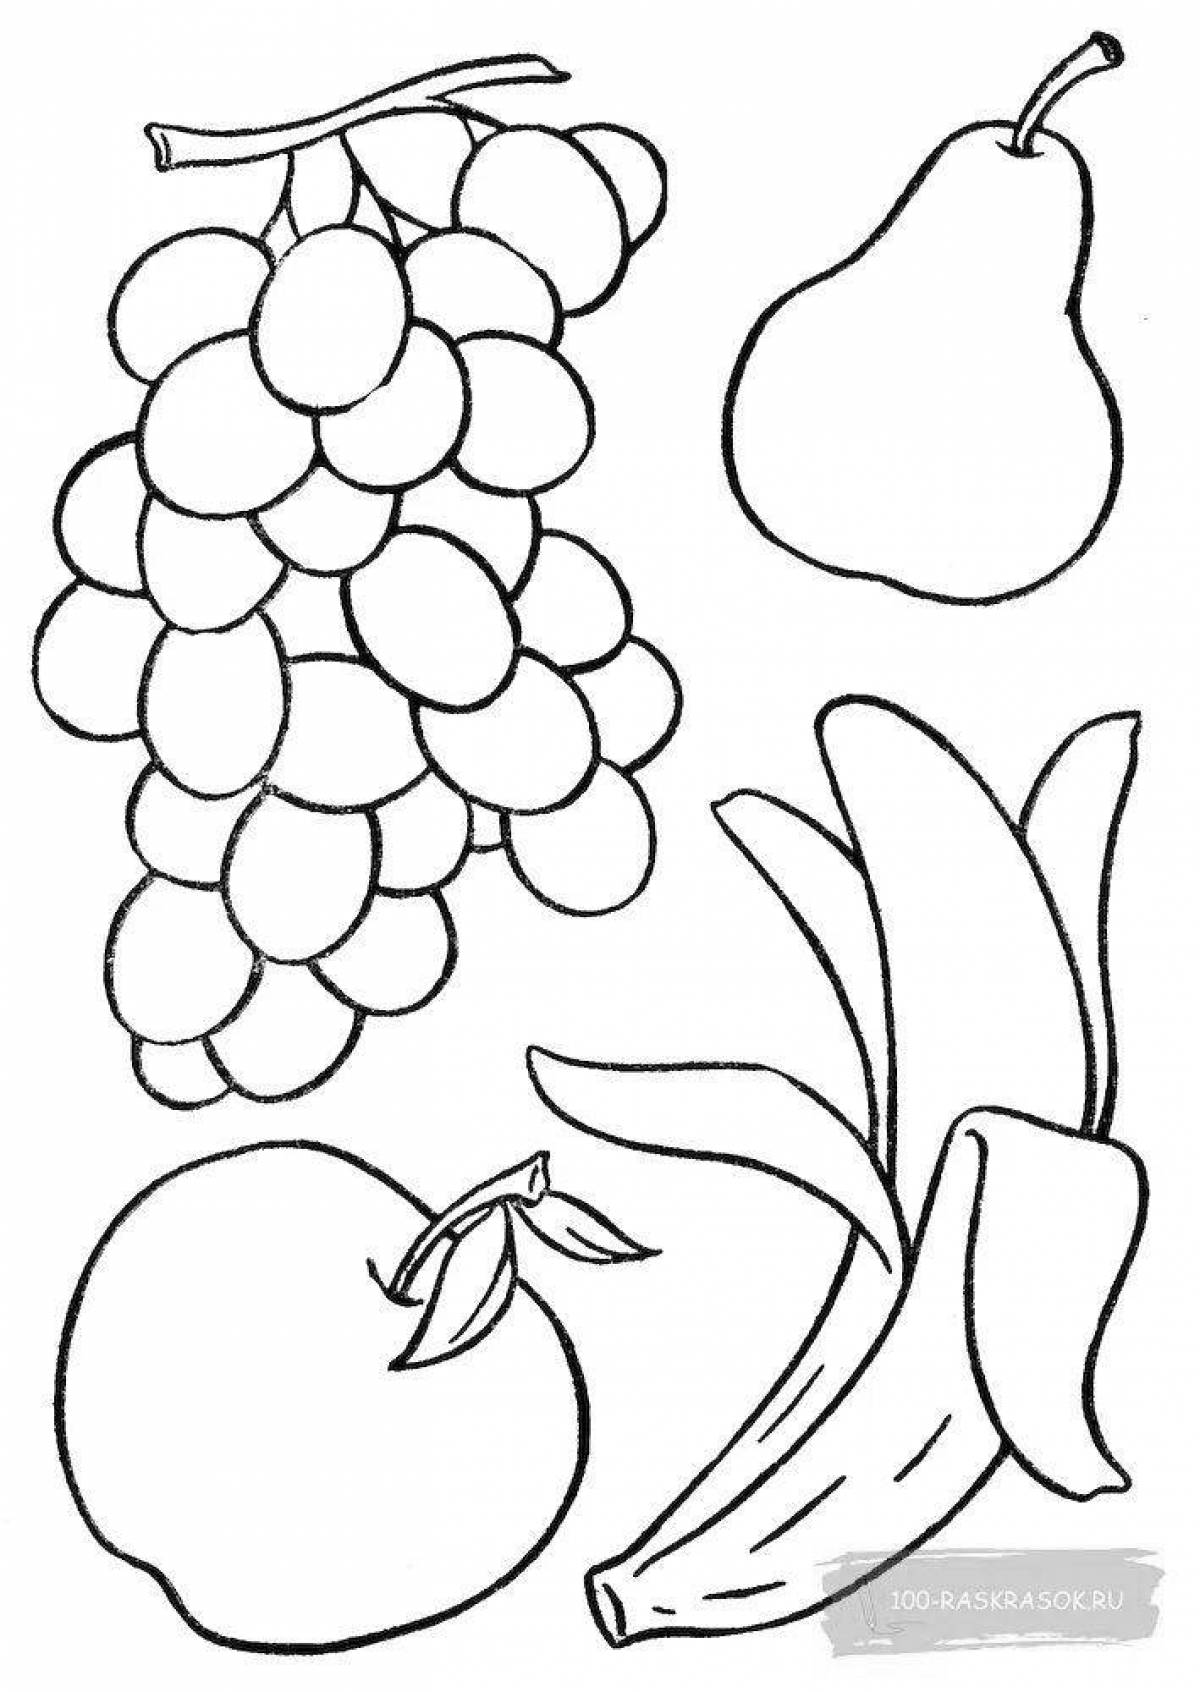 Wonderful coloring pages with vegetables and fruits for kids